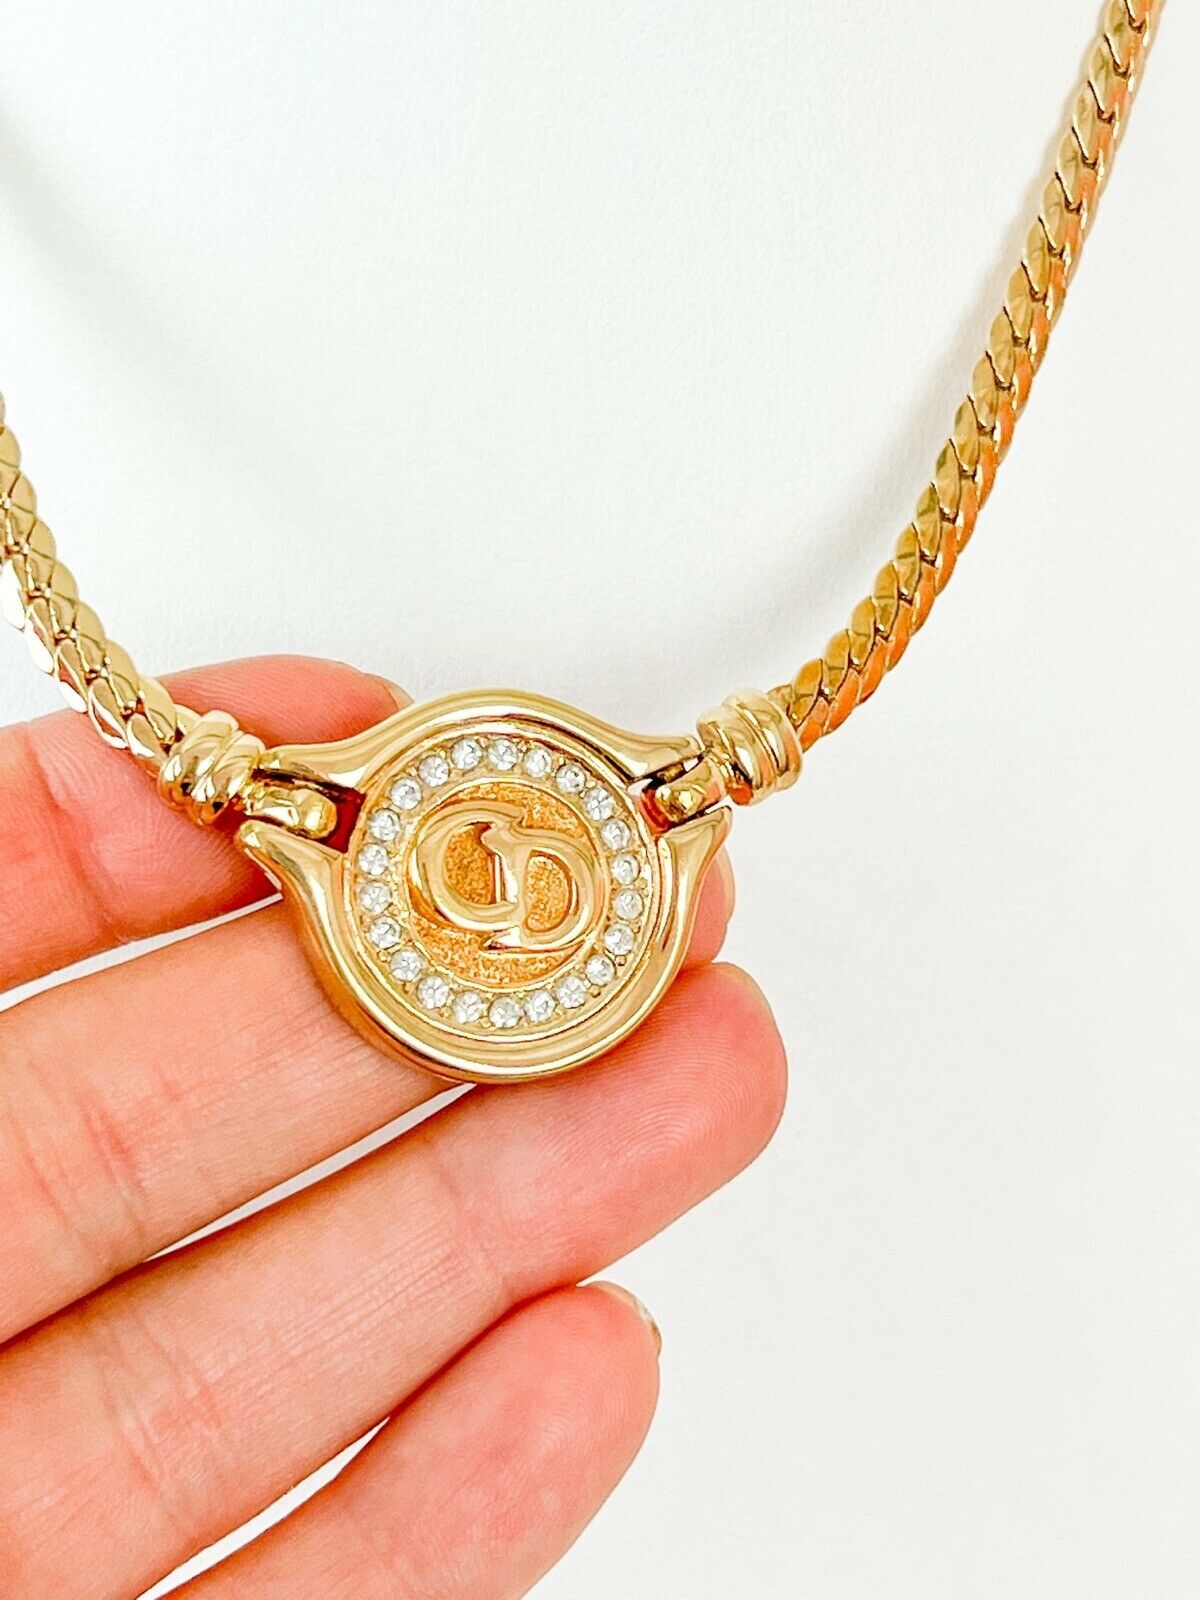 【SOLD OUT】Christian Dior Vintage Choker Necklace Gold Tone CD Logo Rhinestone